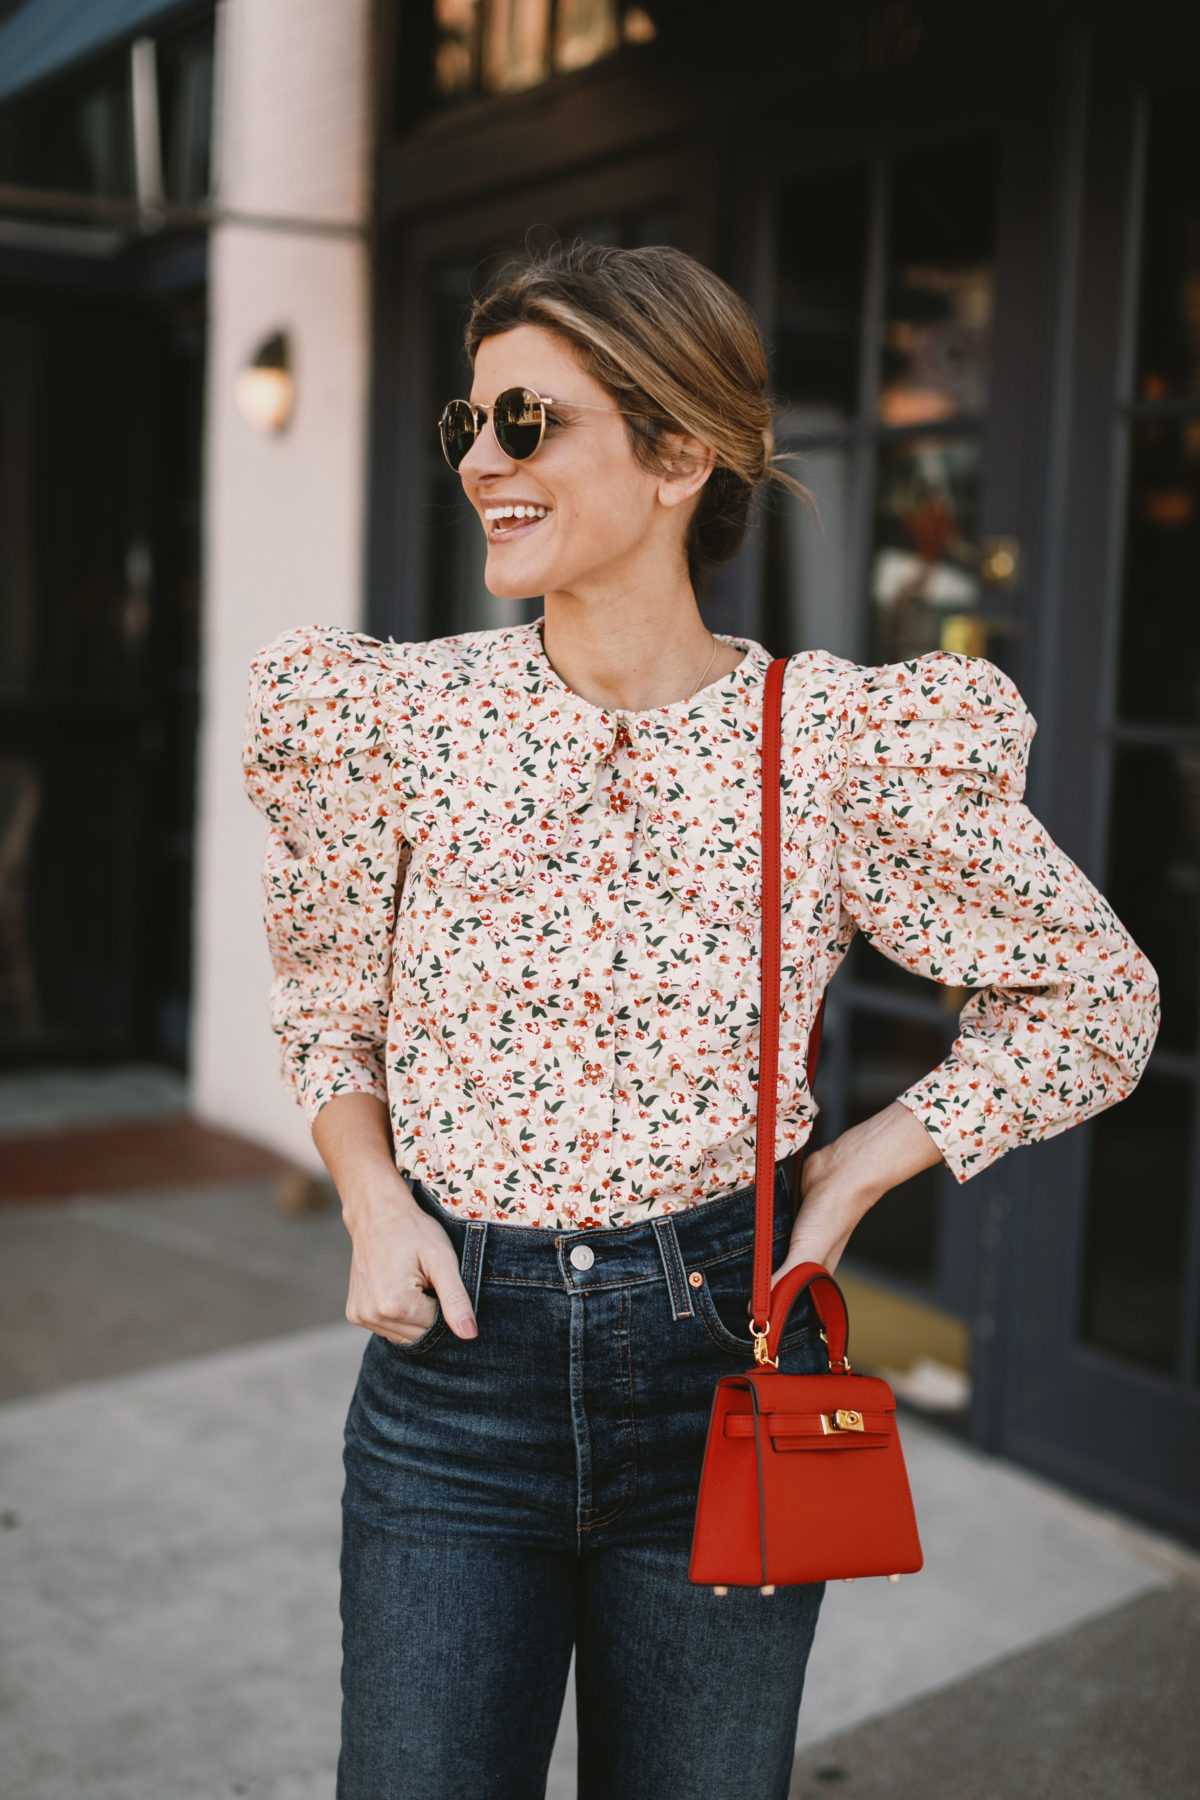 Bright Butler wearing CeliaB floral shirt and J.Crew booties